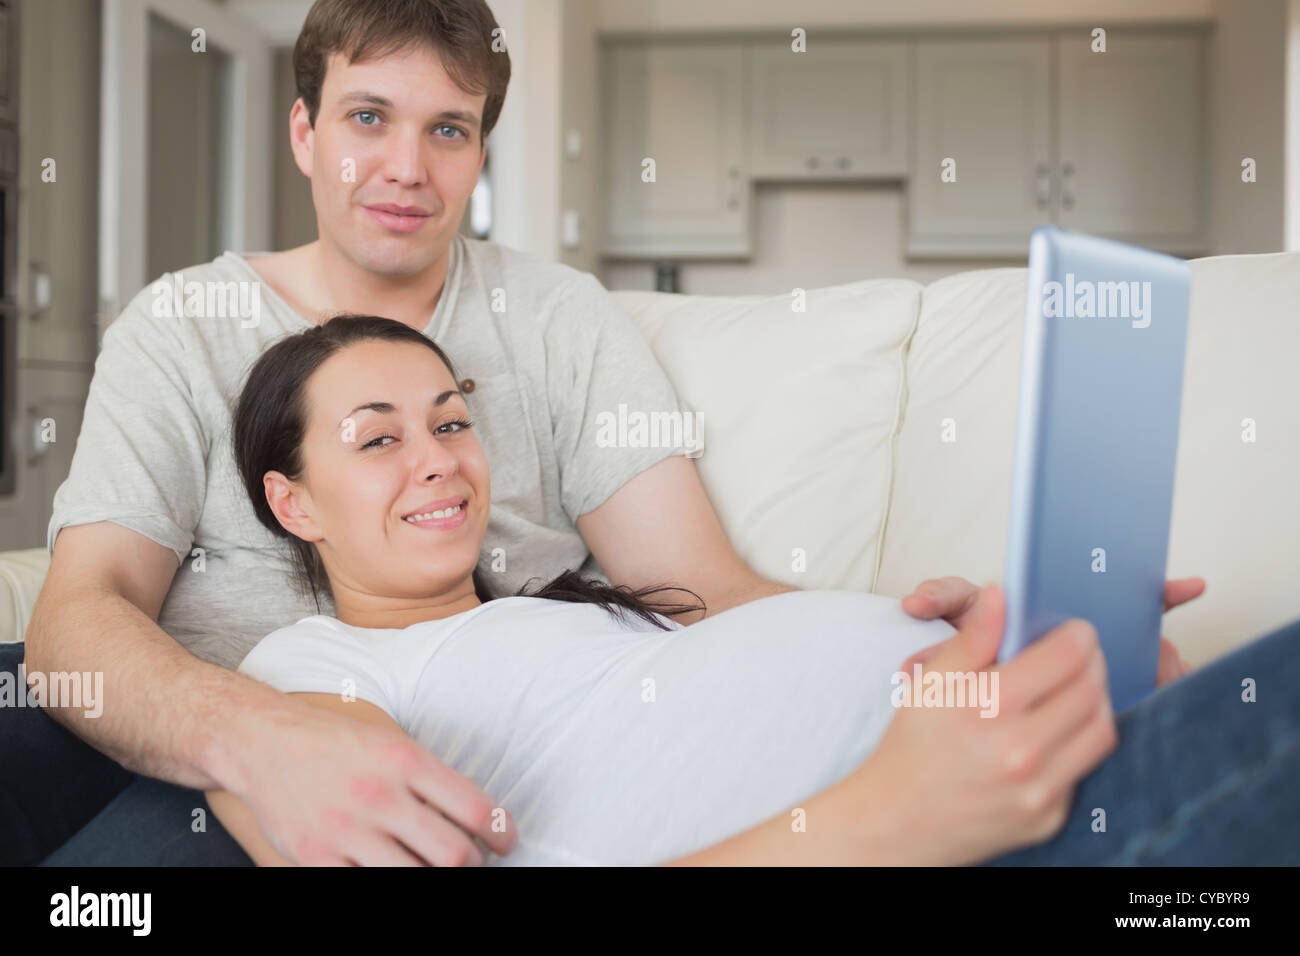 Prospective parents using the ebook and relaxing Stock Photo